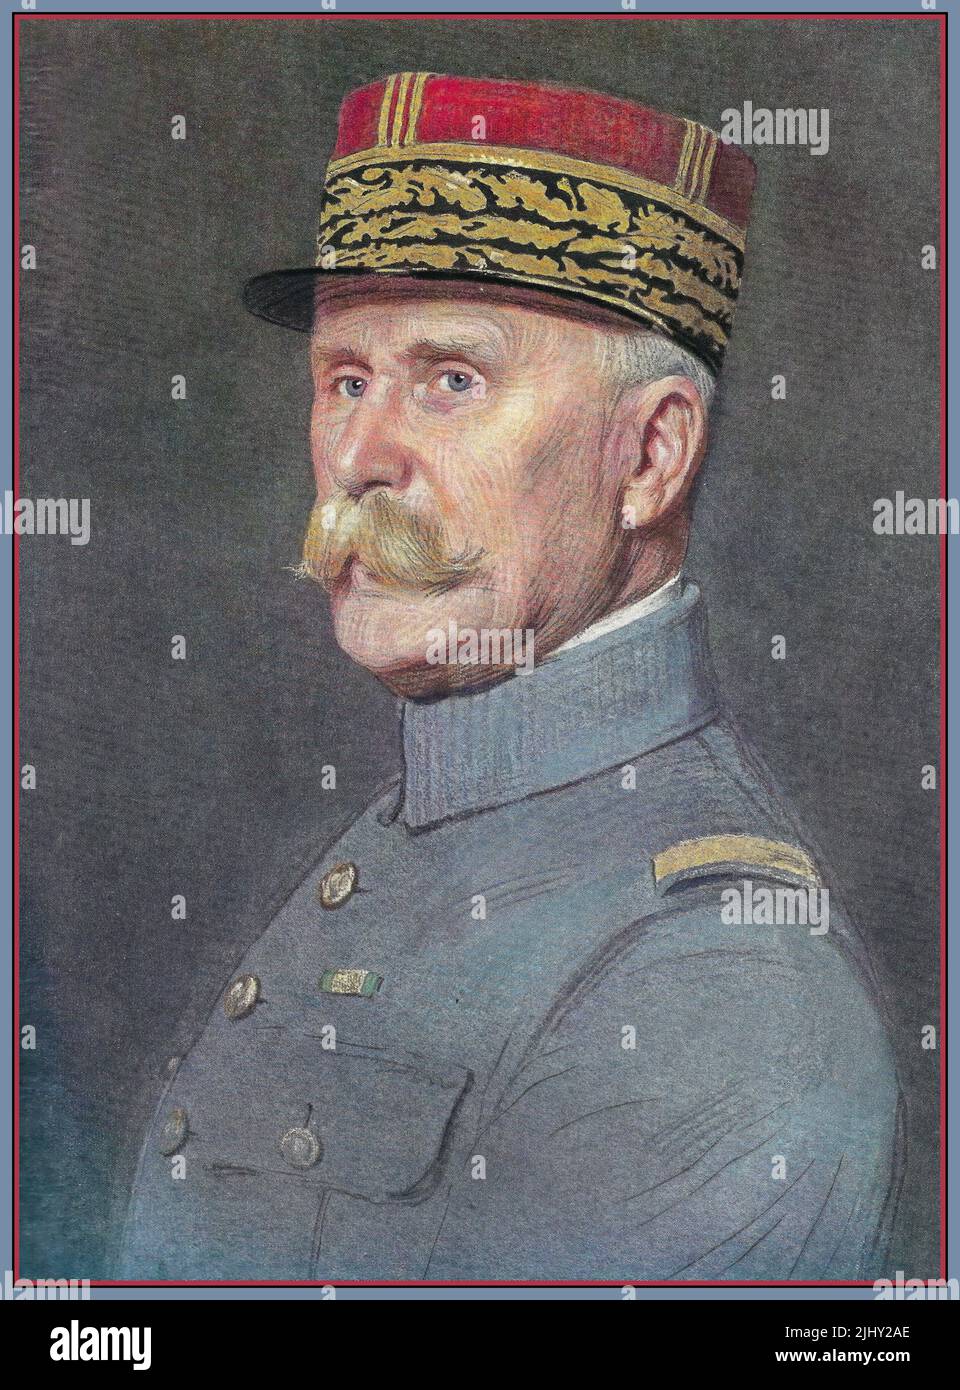 Marshal Pétain 1926 by artist Marcel Baschet  (French: Maréchal Pétain) and sometimes The Old Marshal (French: le vieux Maréchal), was a French general officer who attained the position of Marshal of France at the end of World War I, during which he became known as The Lion of Verdun (French: le lion de Verdun). He then served as Chief of State of Vichy France from 1940 to 1944. Pétain, who was 84 years old in 1940, ranks as France's oldest head of state. Stock Photo